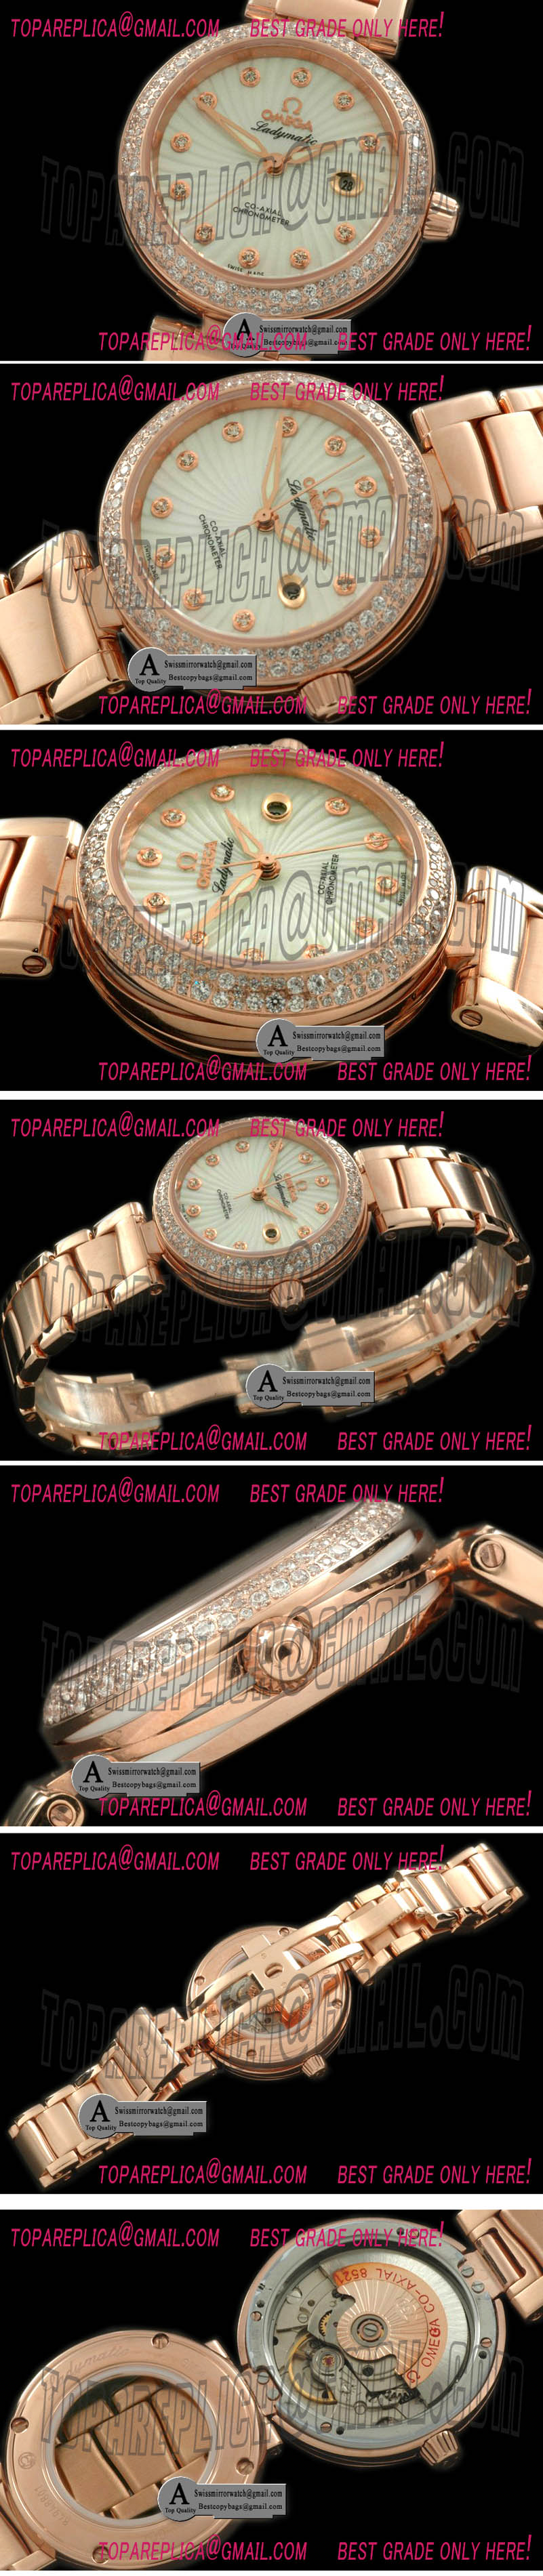 Omega Deville Ladymatic Mid 425.65.34.20.55.001 RG/RG White A-2836 Replica Watches